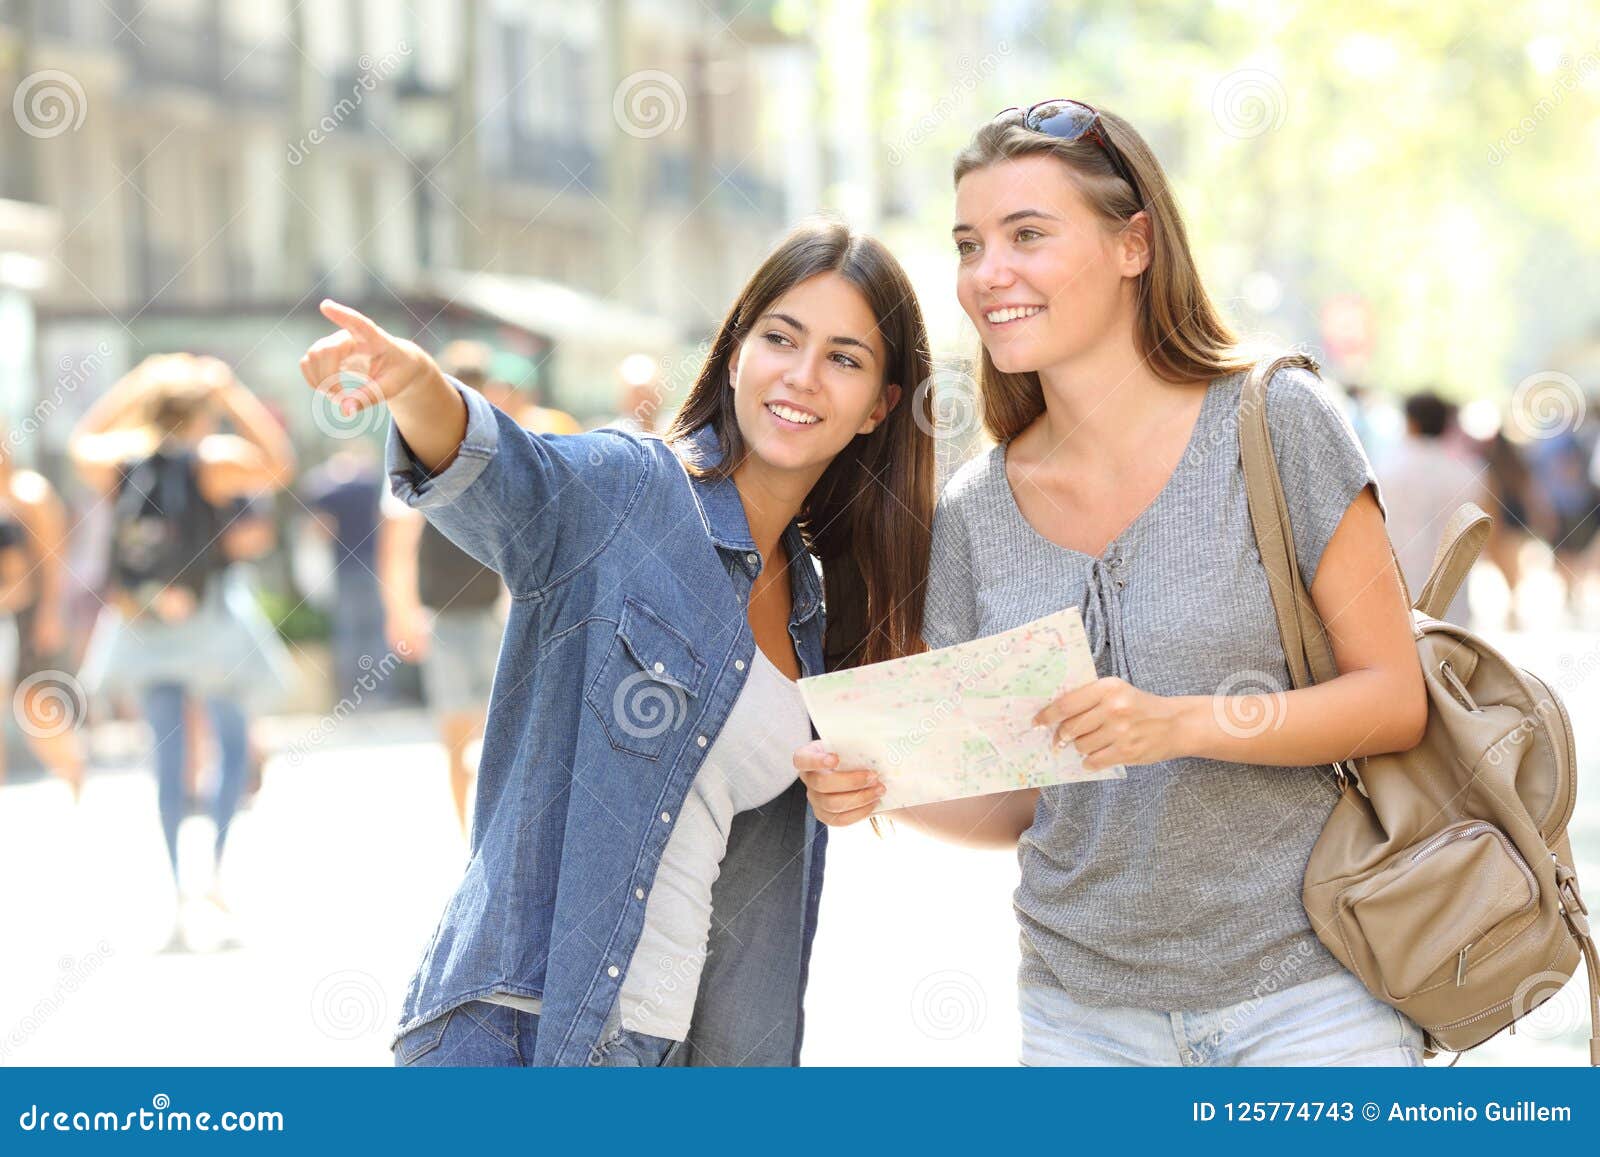 girl helping to a tourist who asks direction